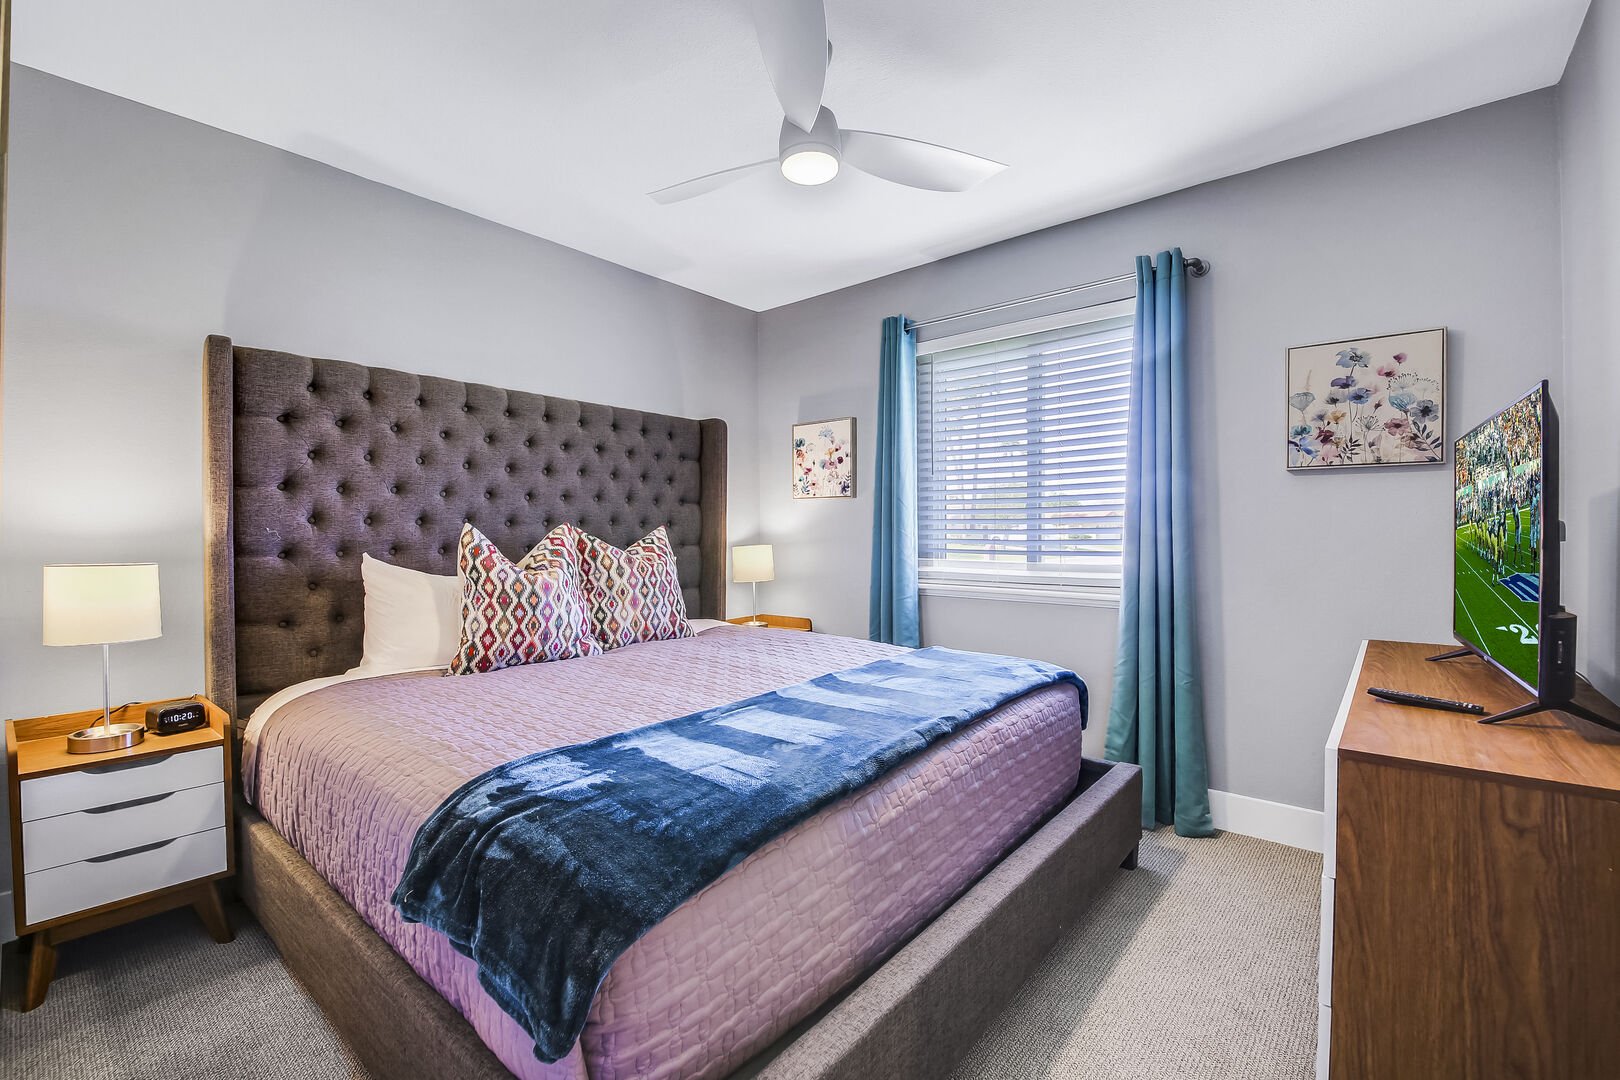 Bedroom 3 is located across the hallway bathroom and features a Queen-sized Bed and 41-inch Vizio Smart television.